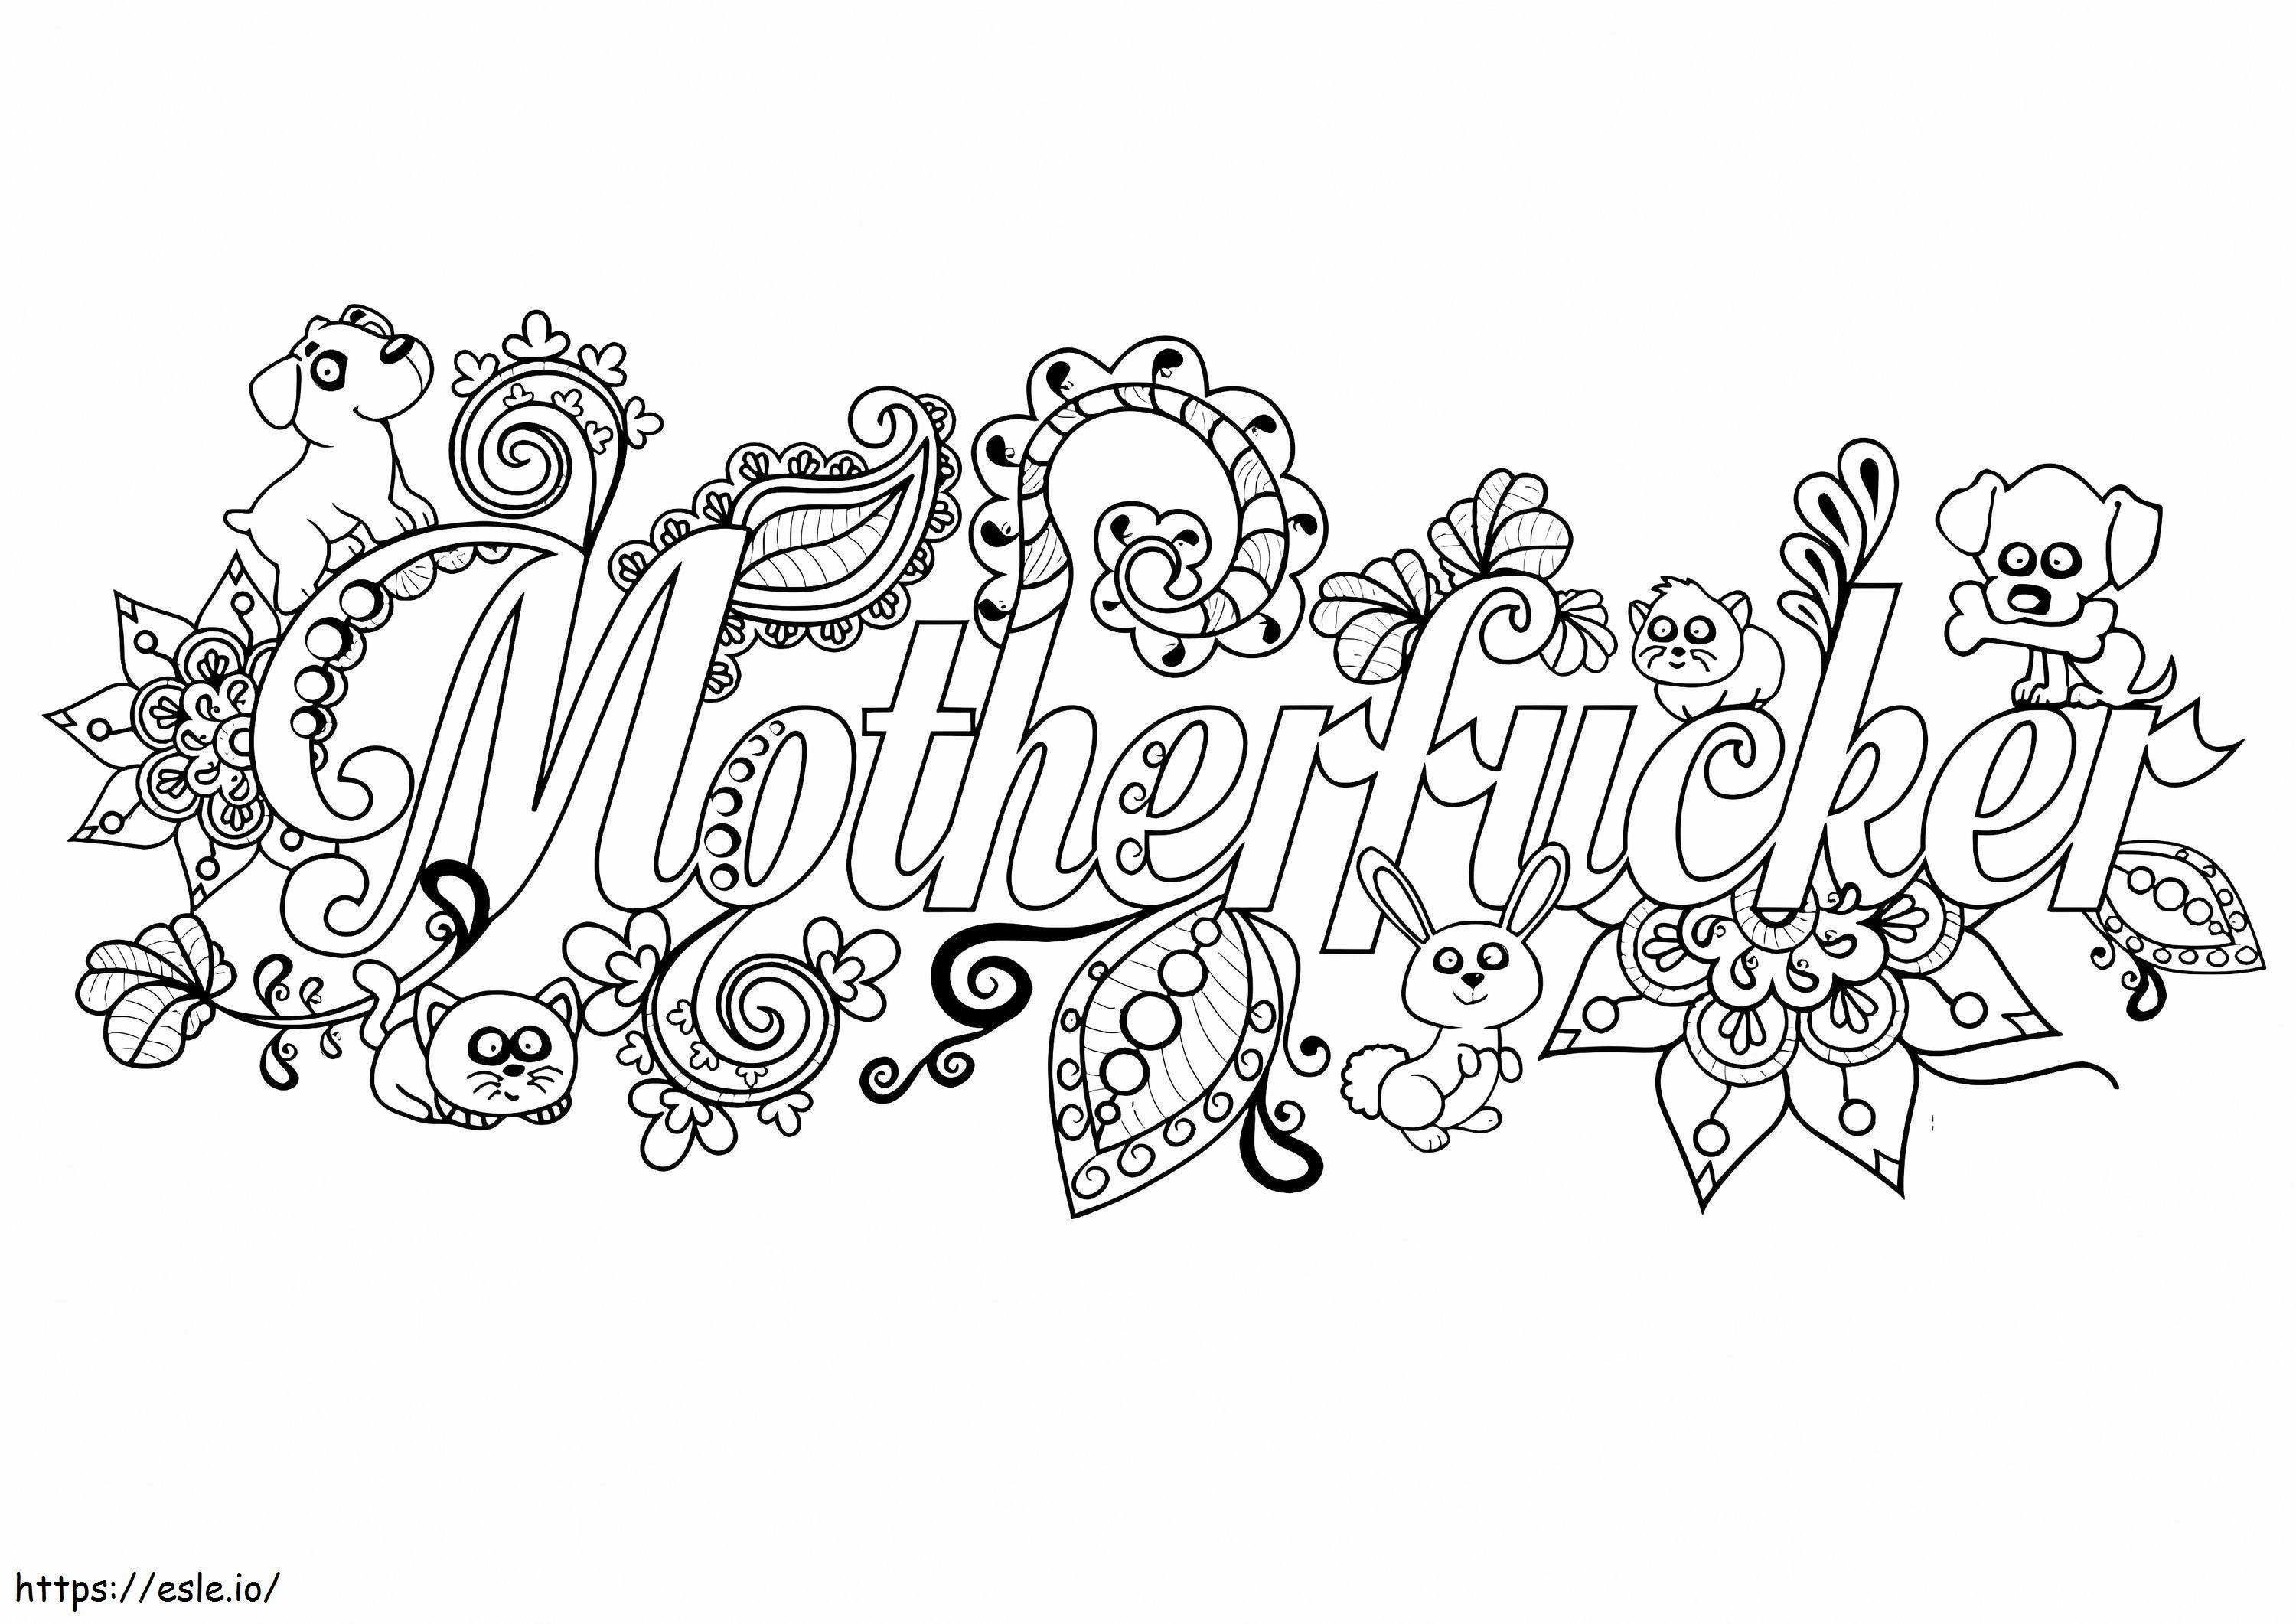 Motherfucker coloring page